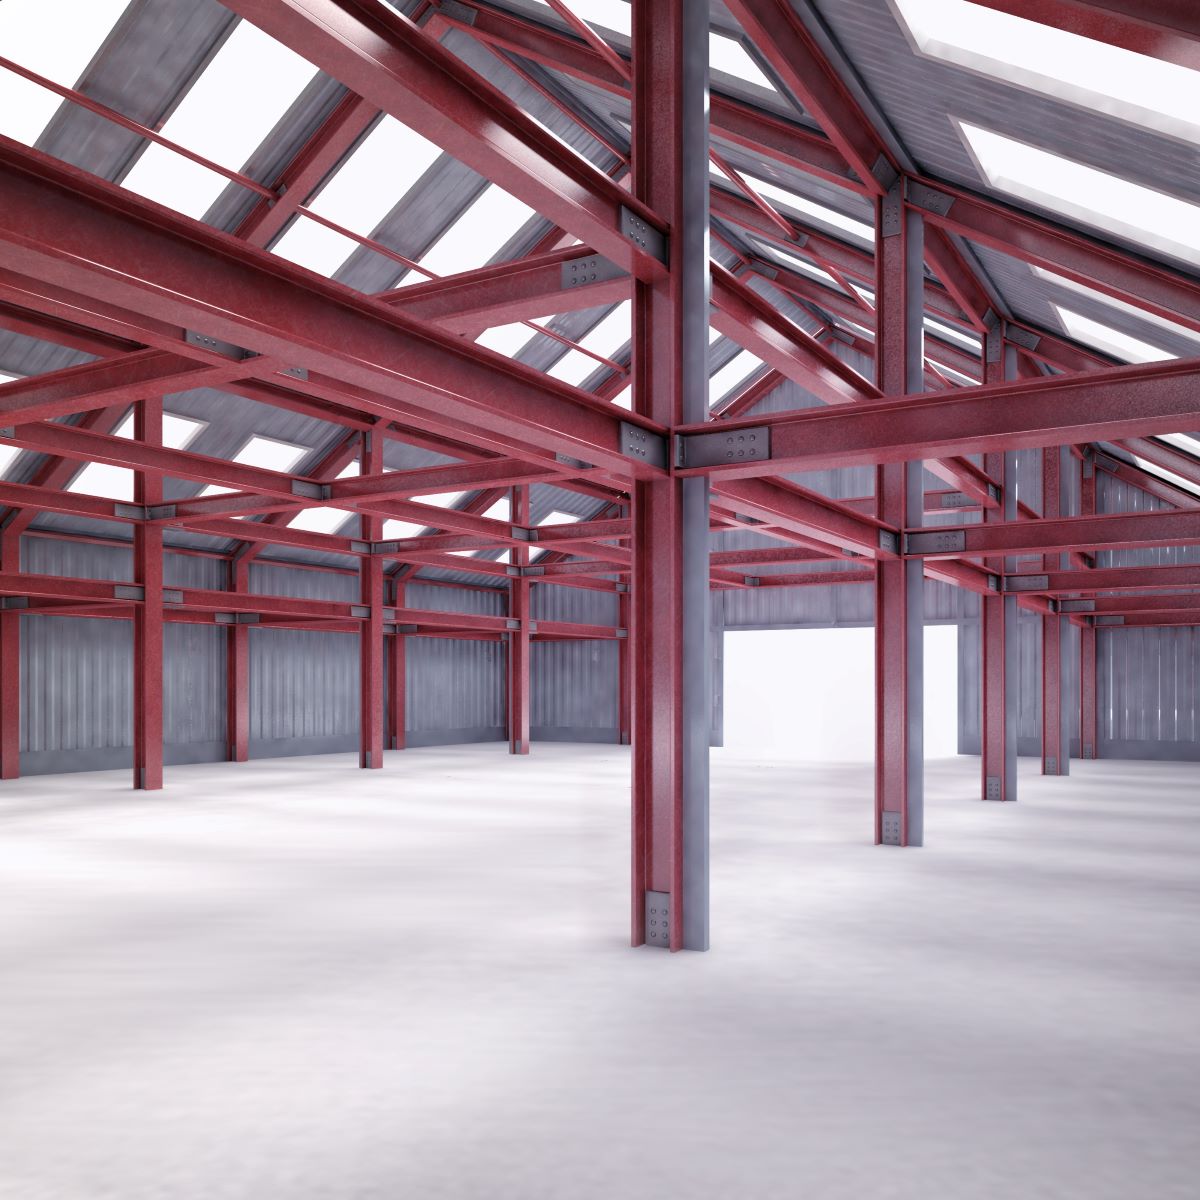 Interior of Texas metal building with steel frame